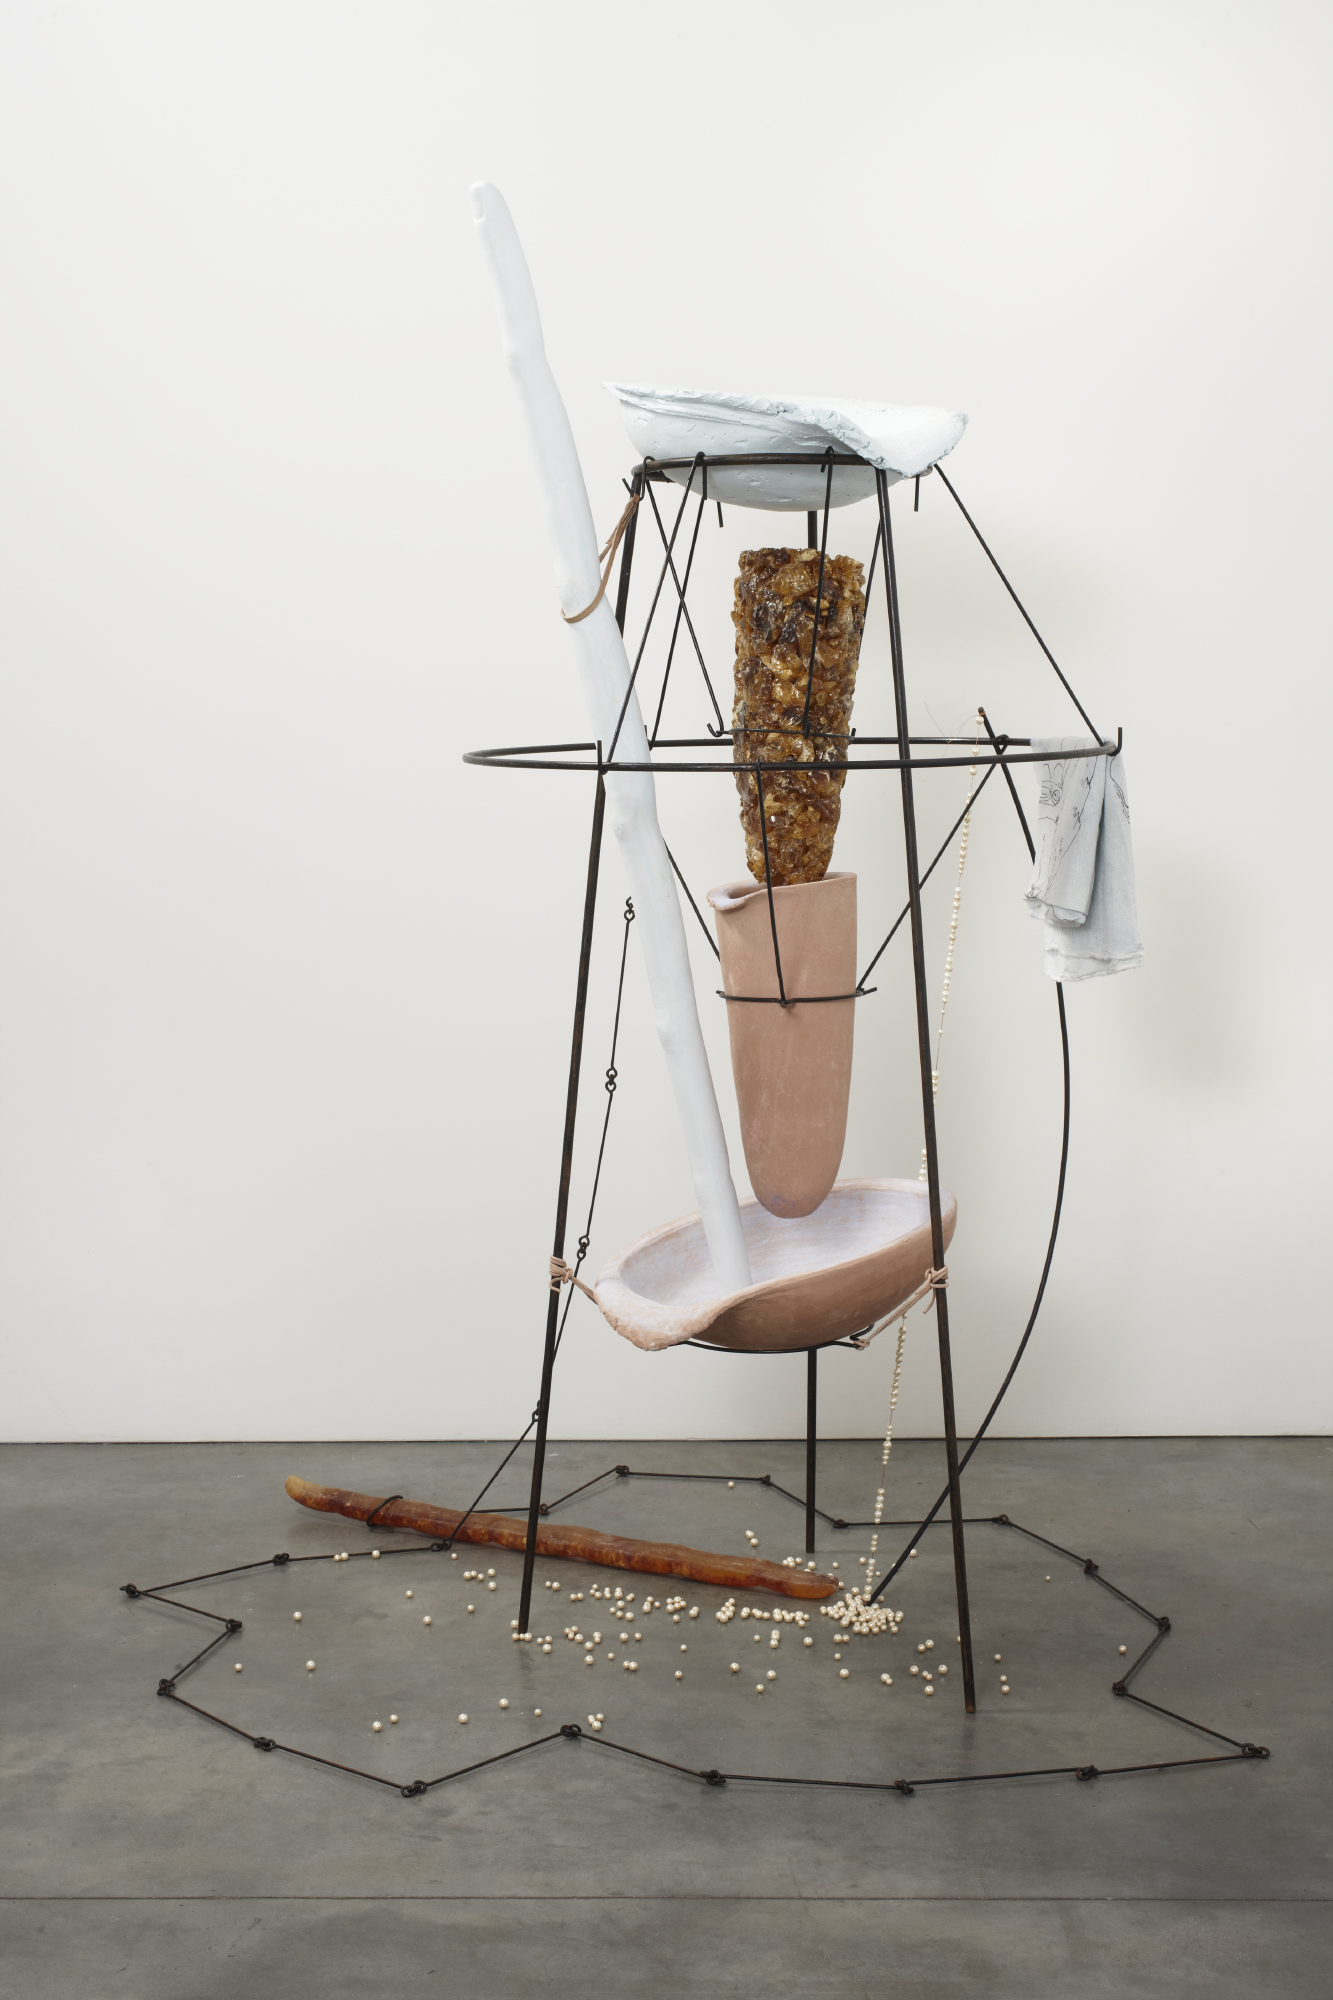 Tunga The Bather, 2014 Iron, steel, resin, ceramics, plaster, and cotton paper 220 x 150 x 150 cm © Tunga, Courtesy of the artist and Luhring Augustine, New York